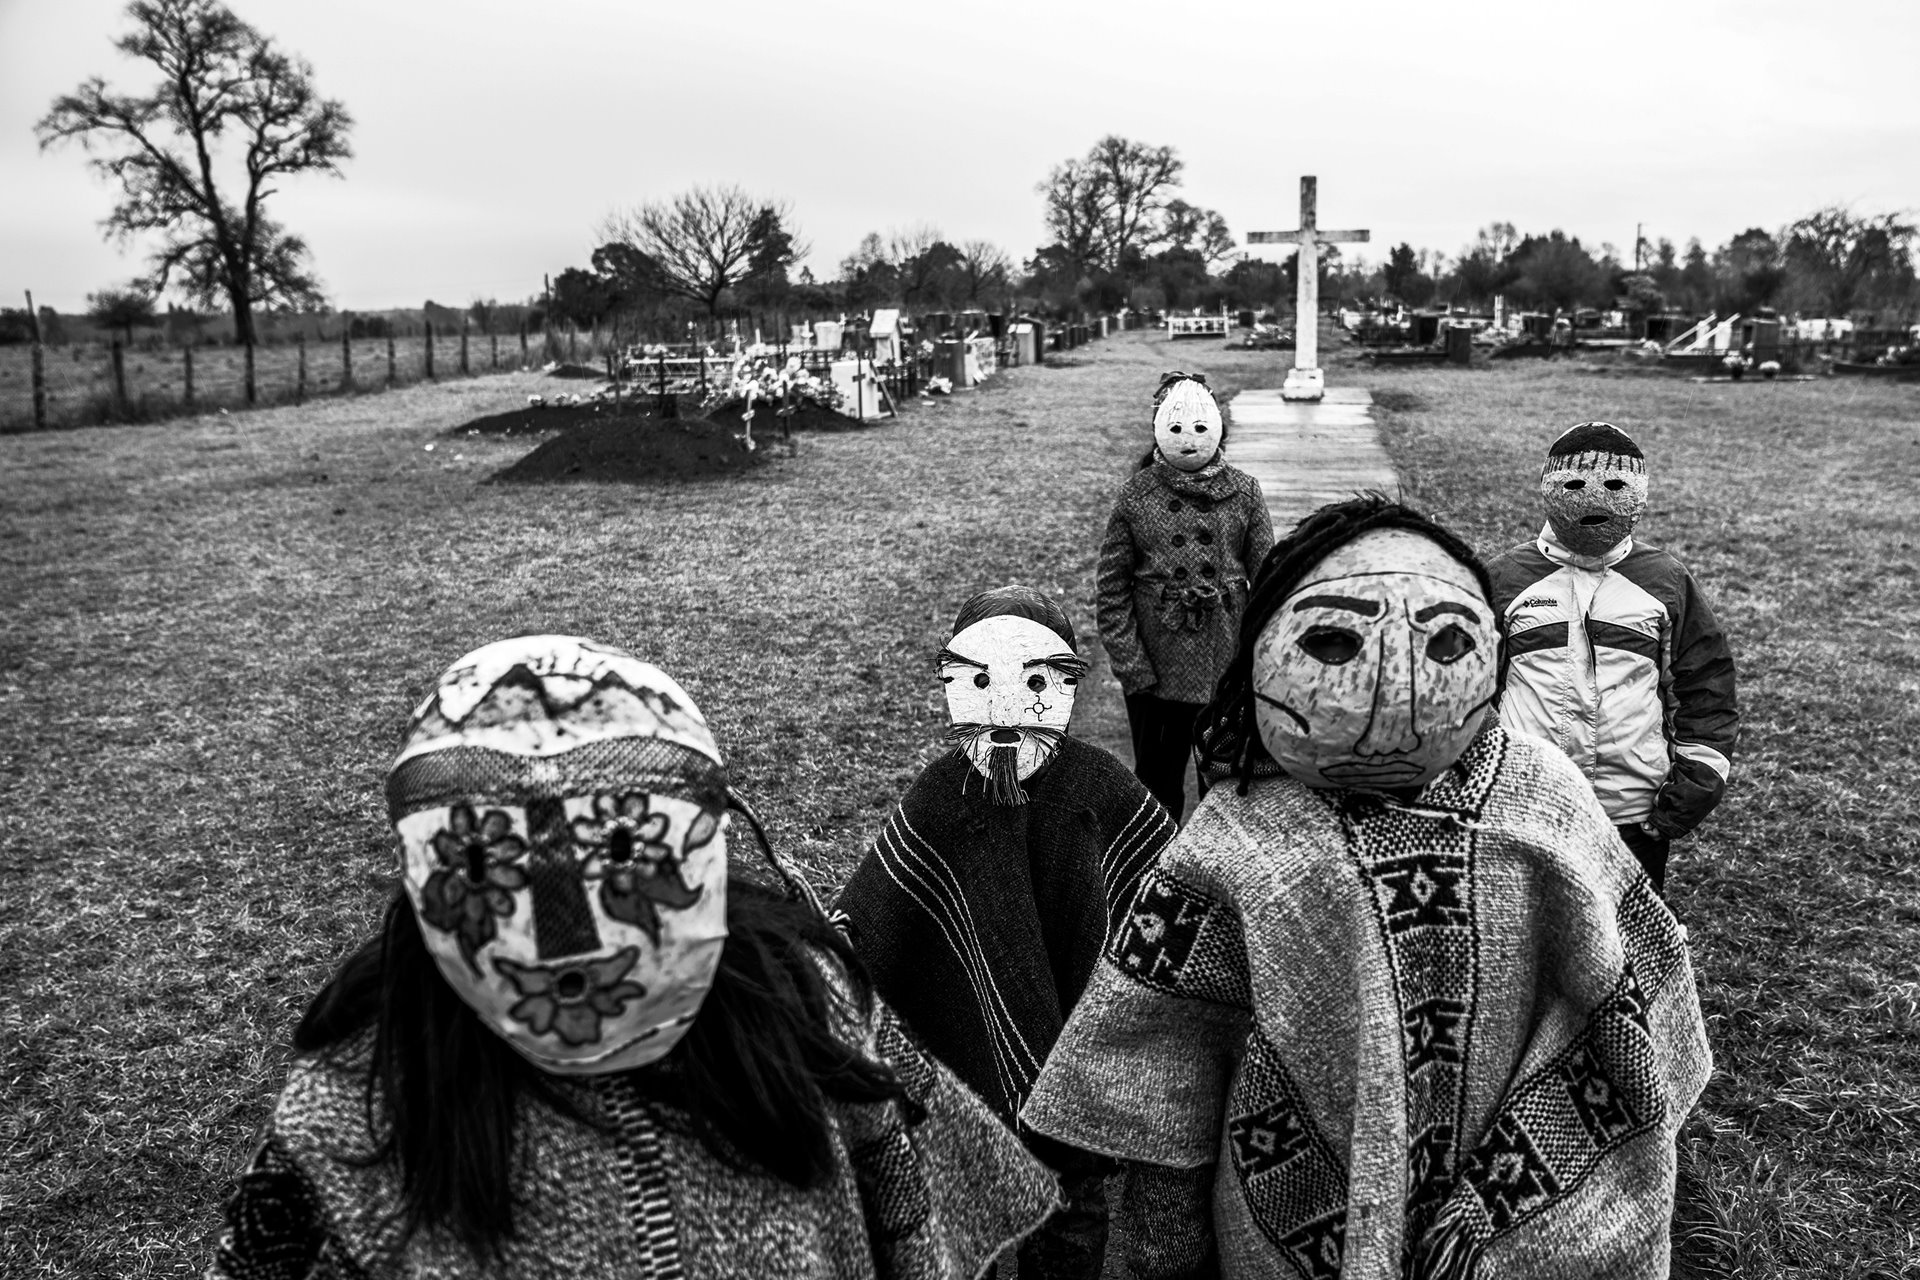 Children wear traditional <em>Ngillatun</em> masks in a Mapuche cemetery, in Maihue, Los Ríos, Chile. The local community successfully opposed building of a hydroelectric dam that would have flooded an adjacent ceremonial site.